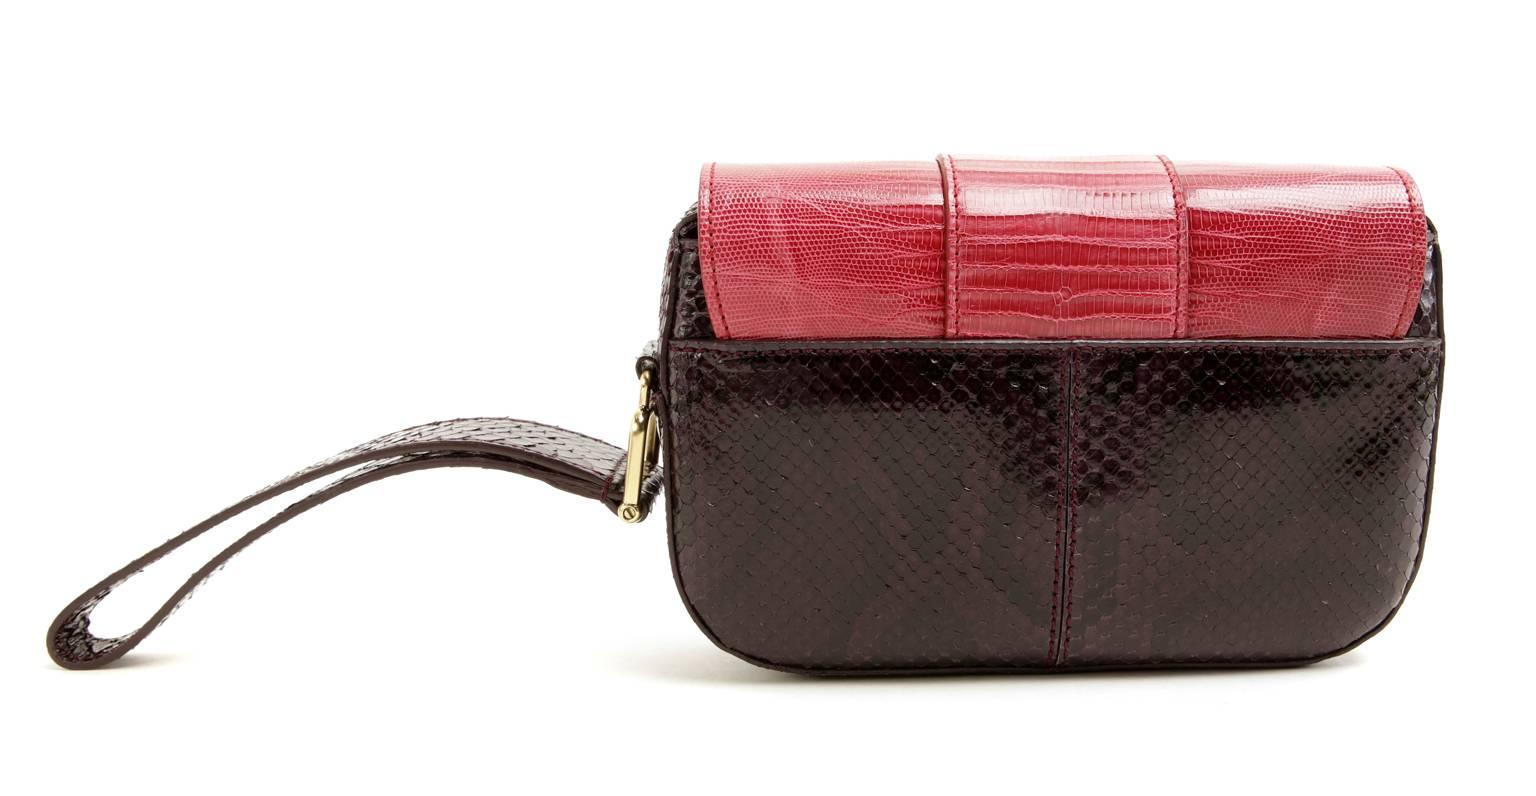 Tods Purple Python and Red Lizard Skin Wristlet In New Condition For Sale In Malibu, CA